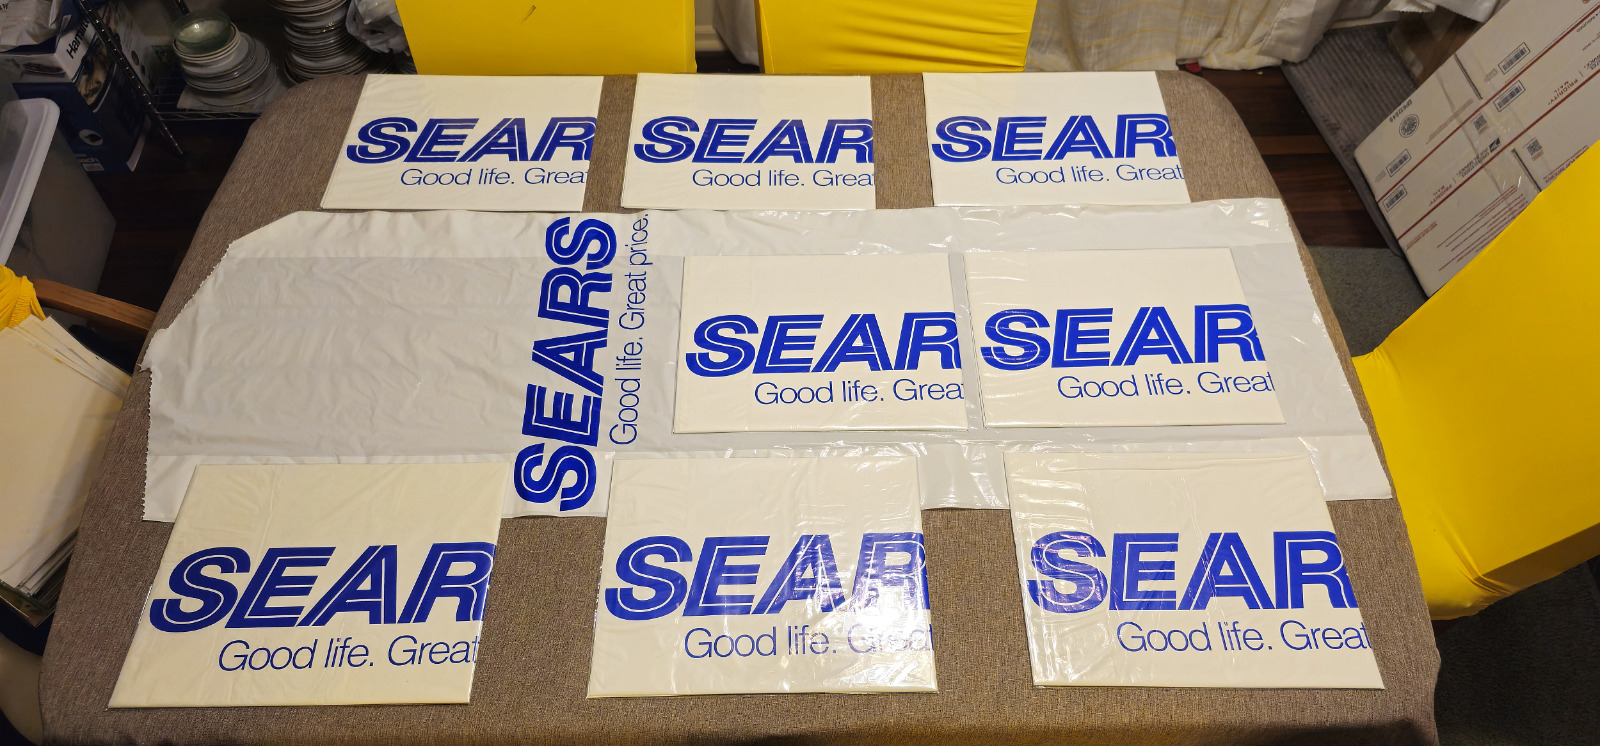 2006 Sears Unused Clothing Bags Ready To Collect Or Resale At Flea Markets